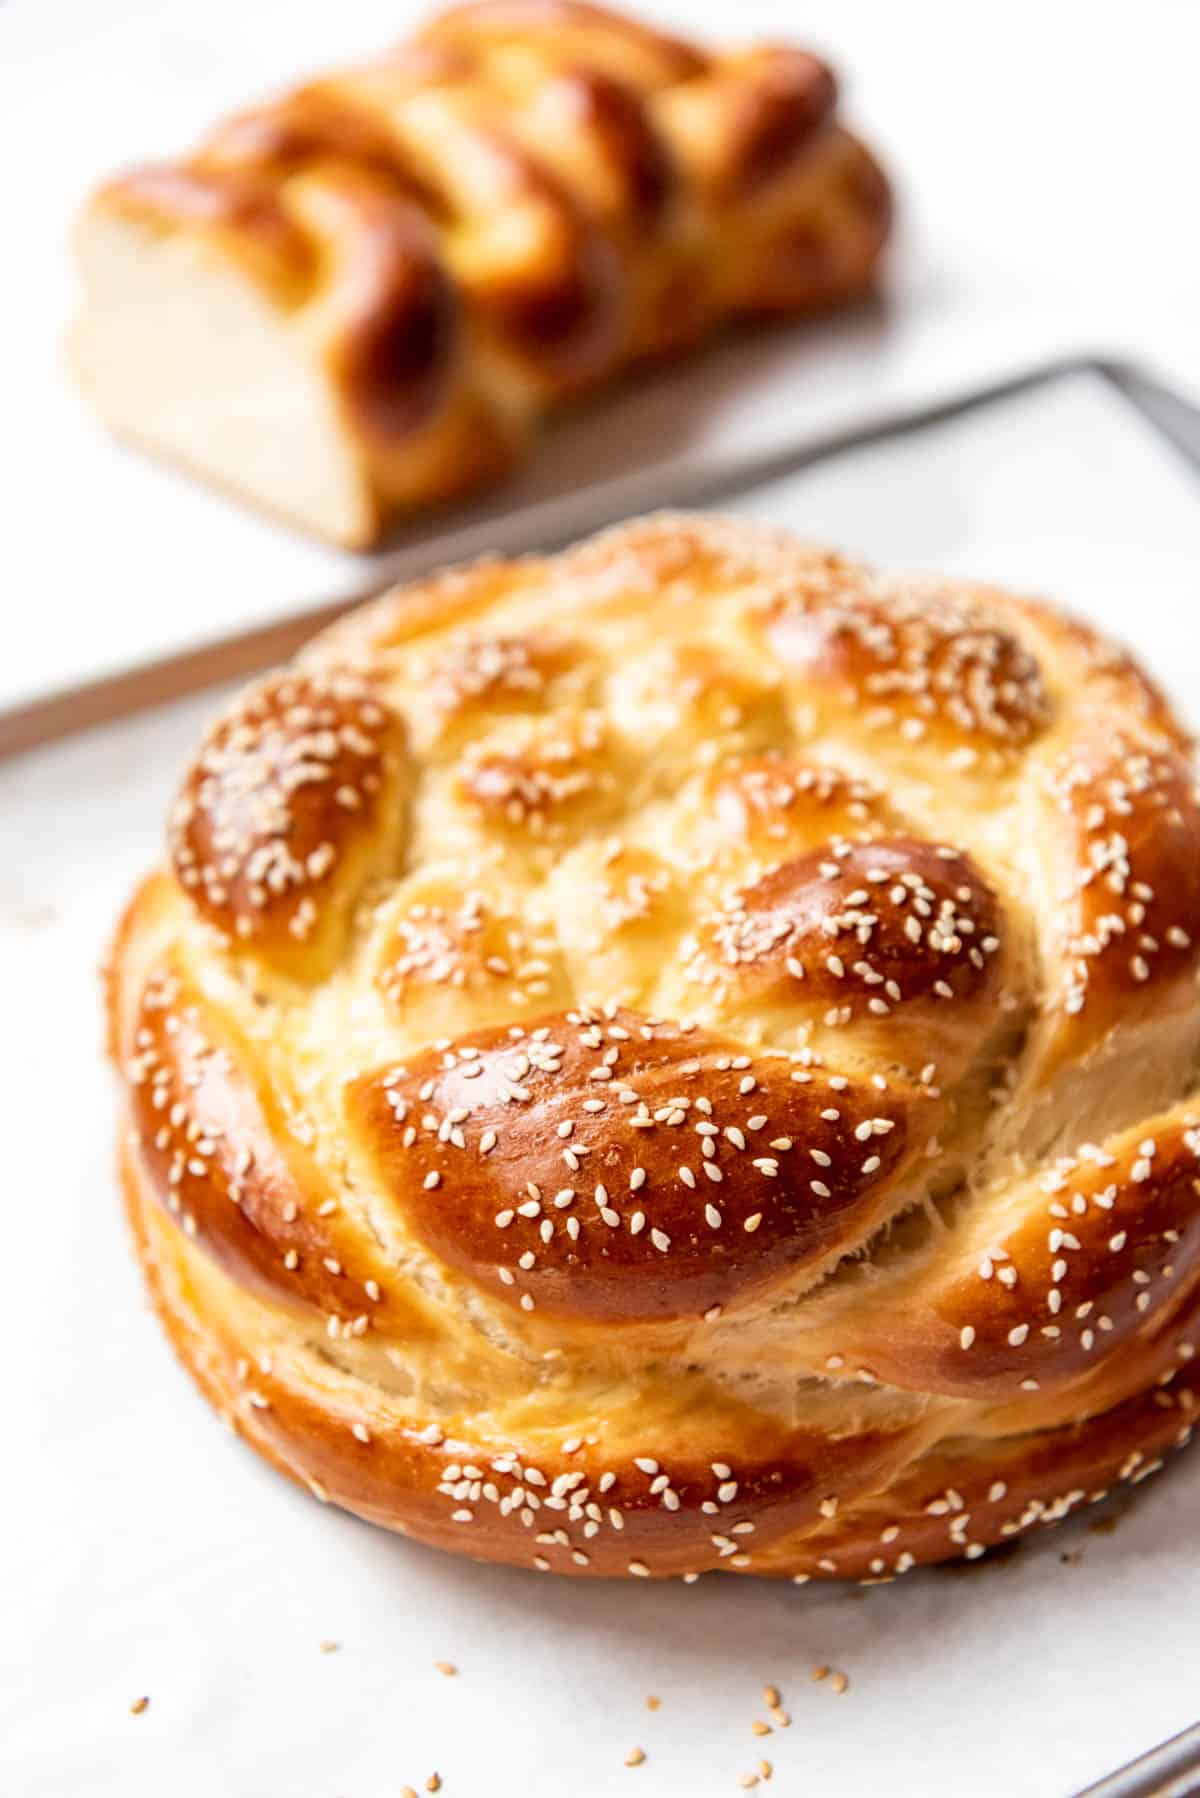 A round braided challah braid with sesame seeds on top.